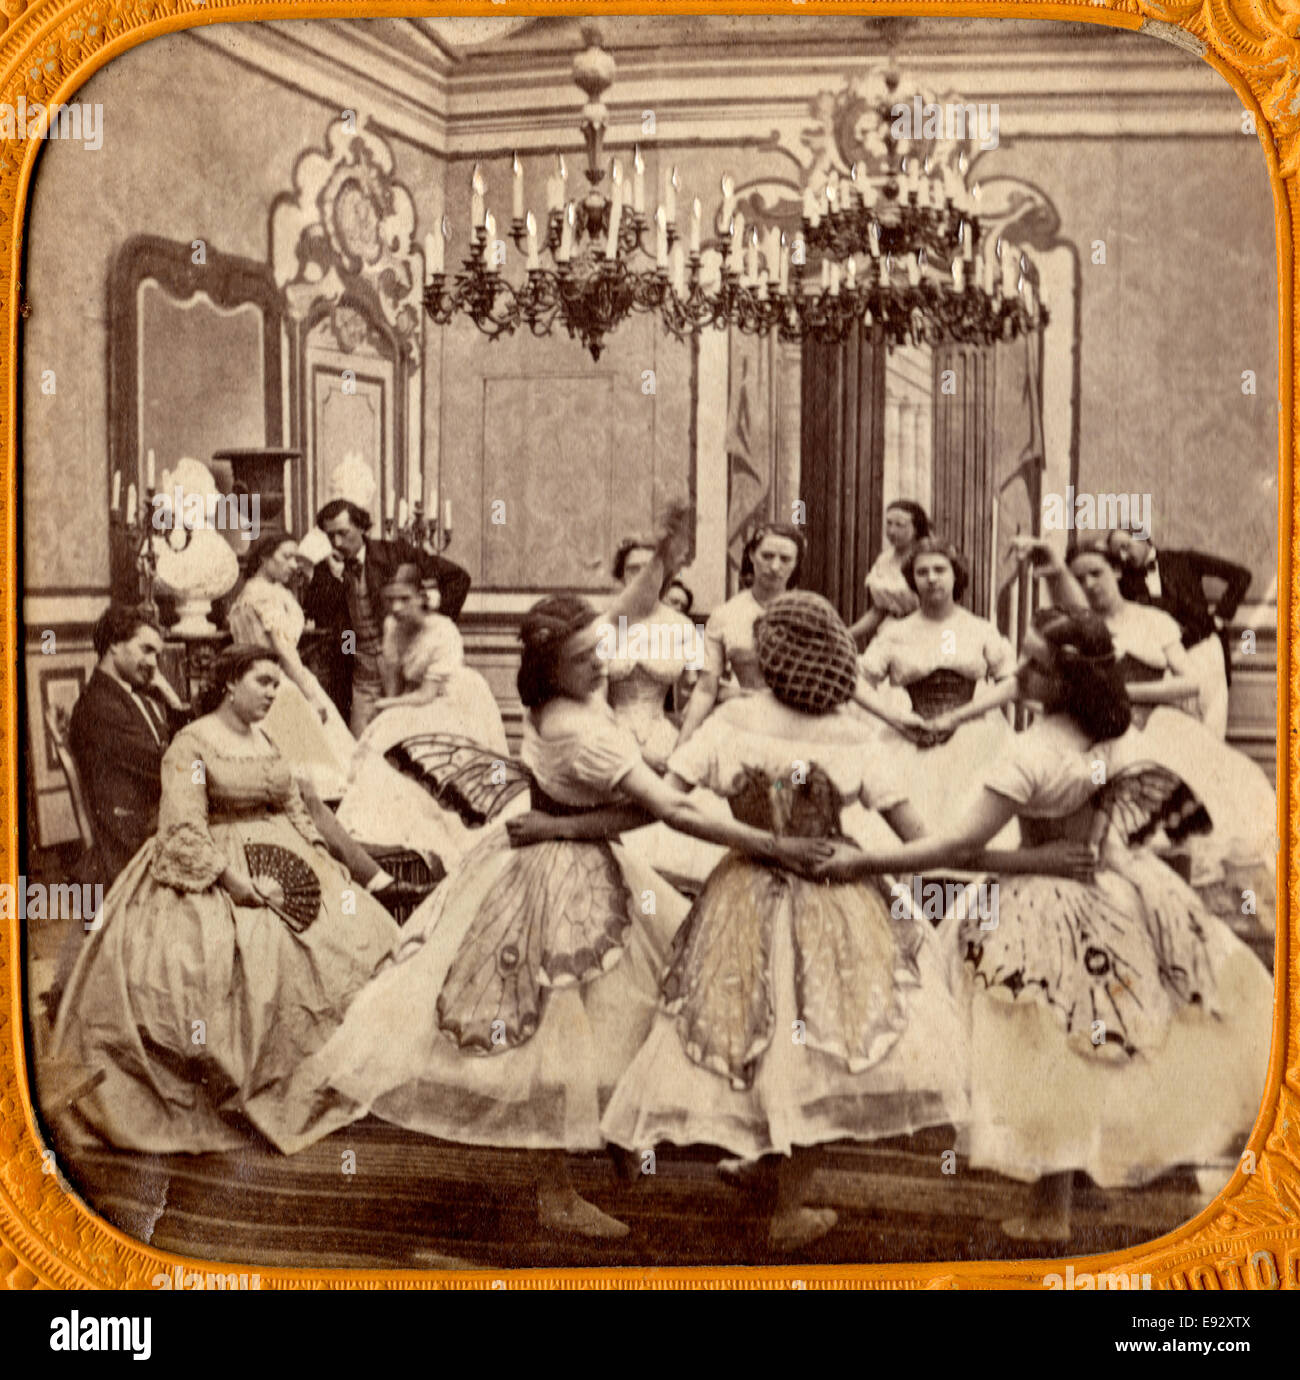 Group of Women Dancing at Party, Single Image of Stereo Card, circa 1890 Stock Photo